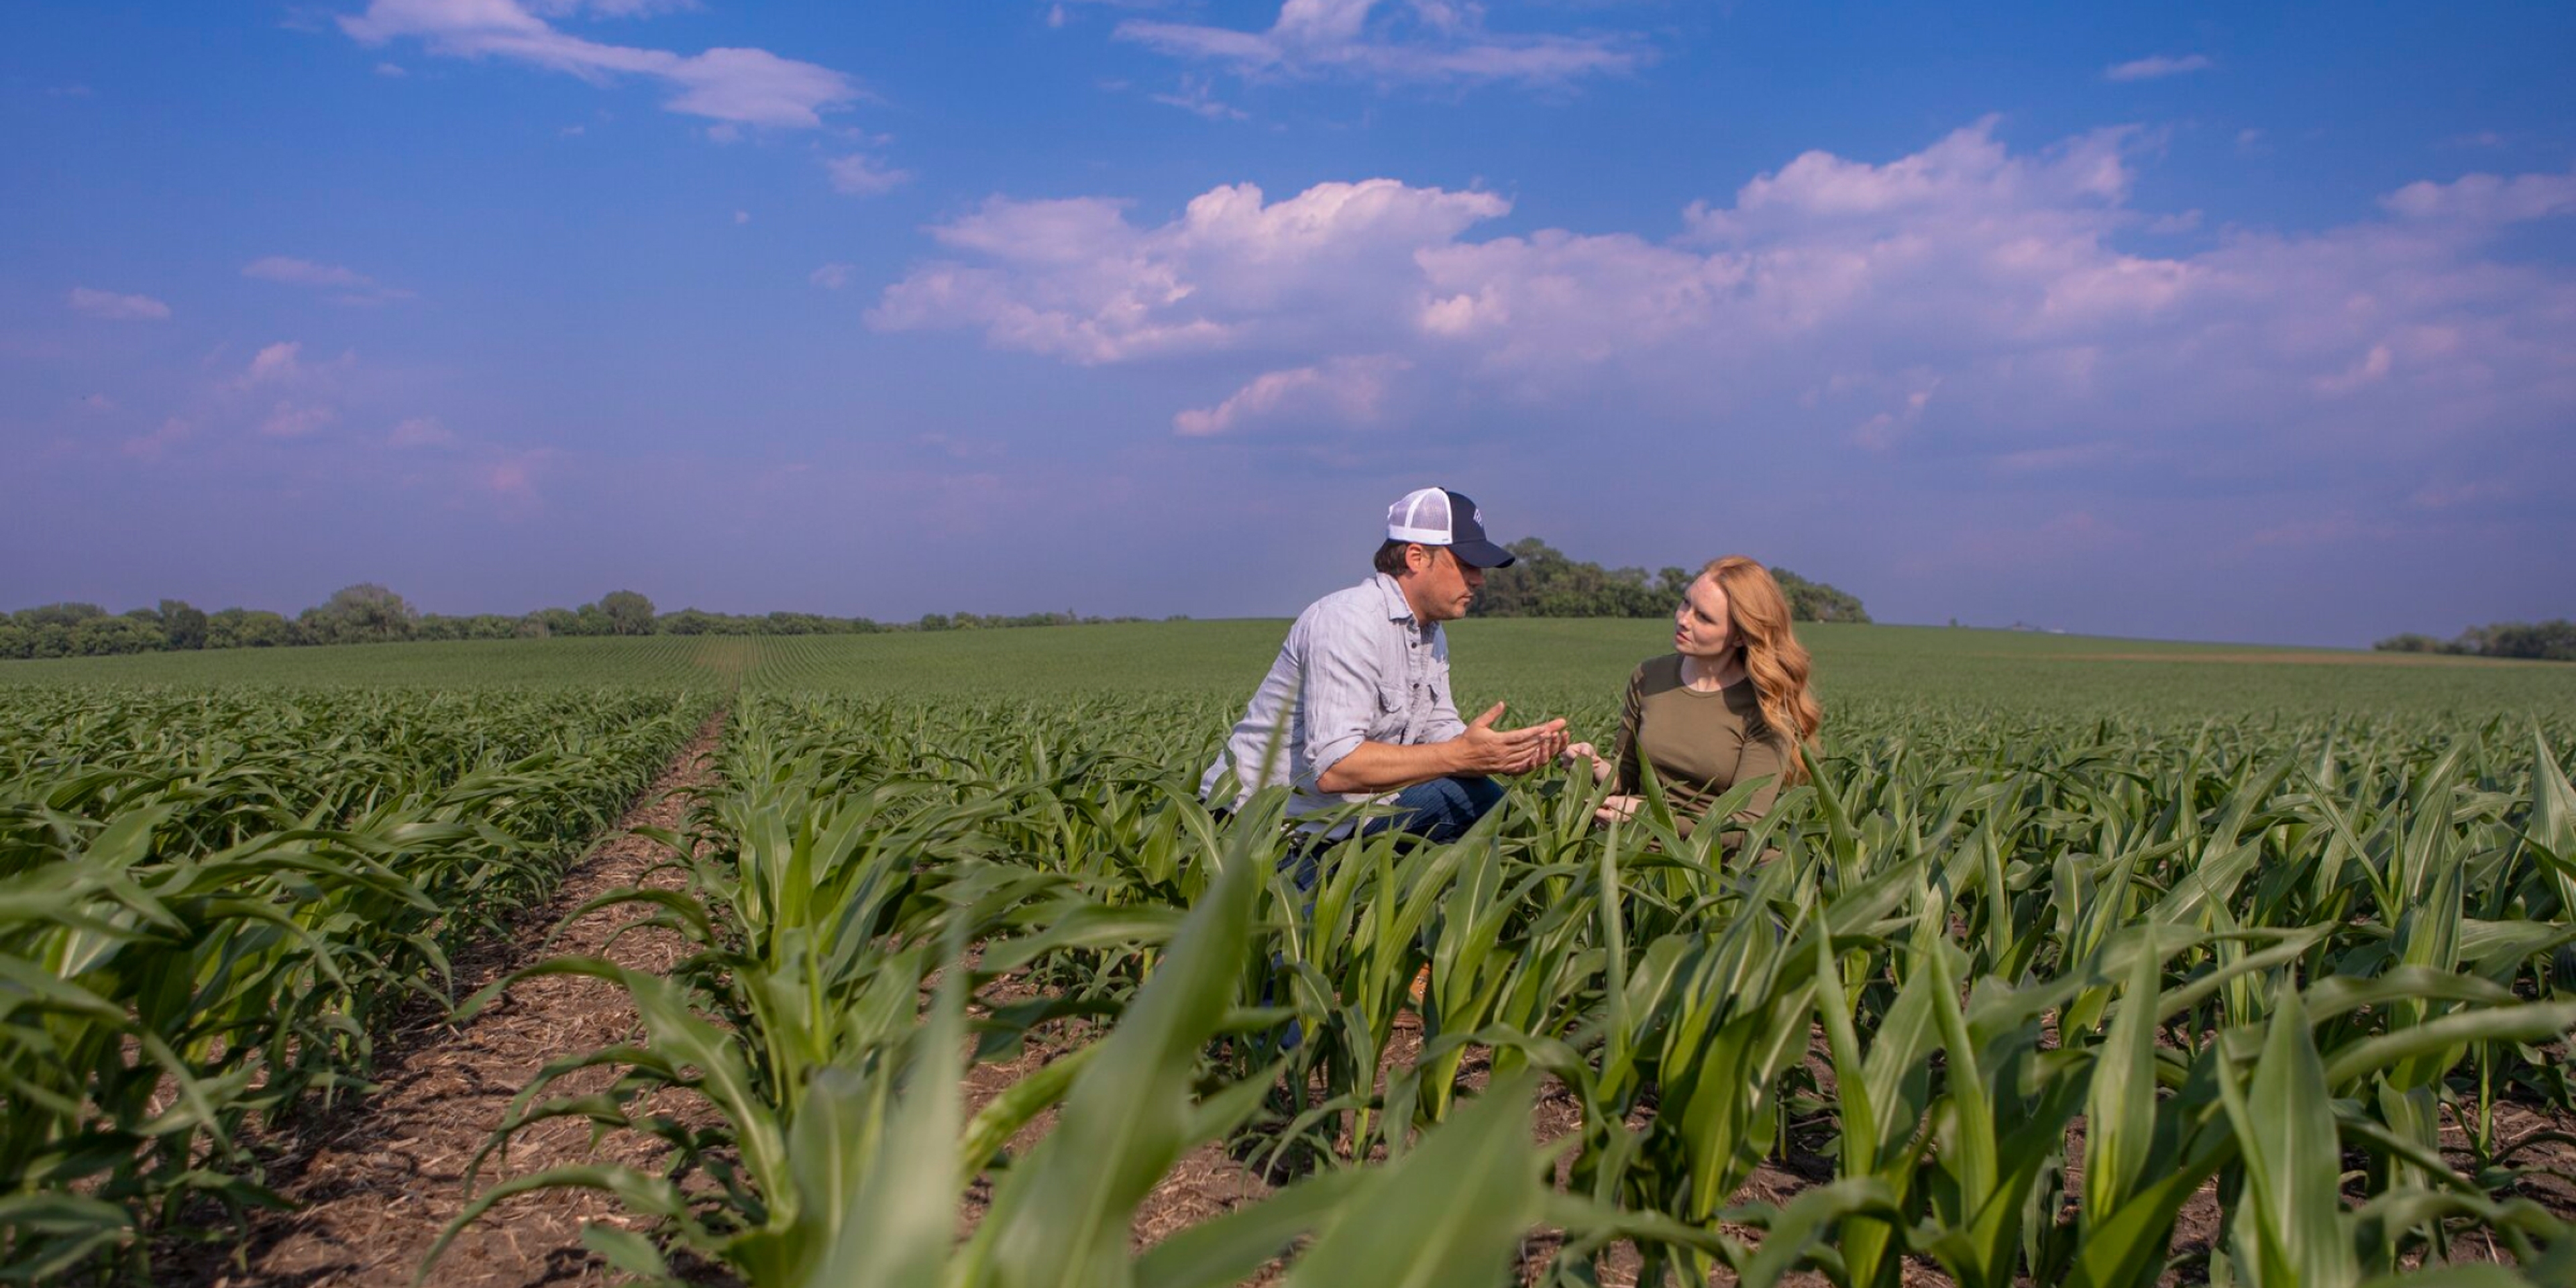 Farmer and Rep Kneeling and Speaking in a Corn Field